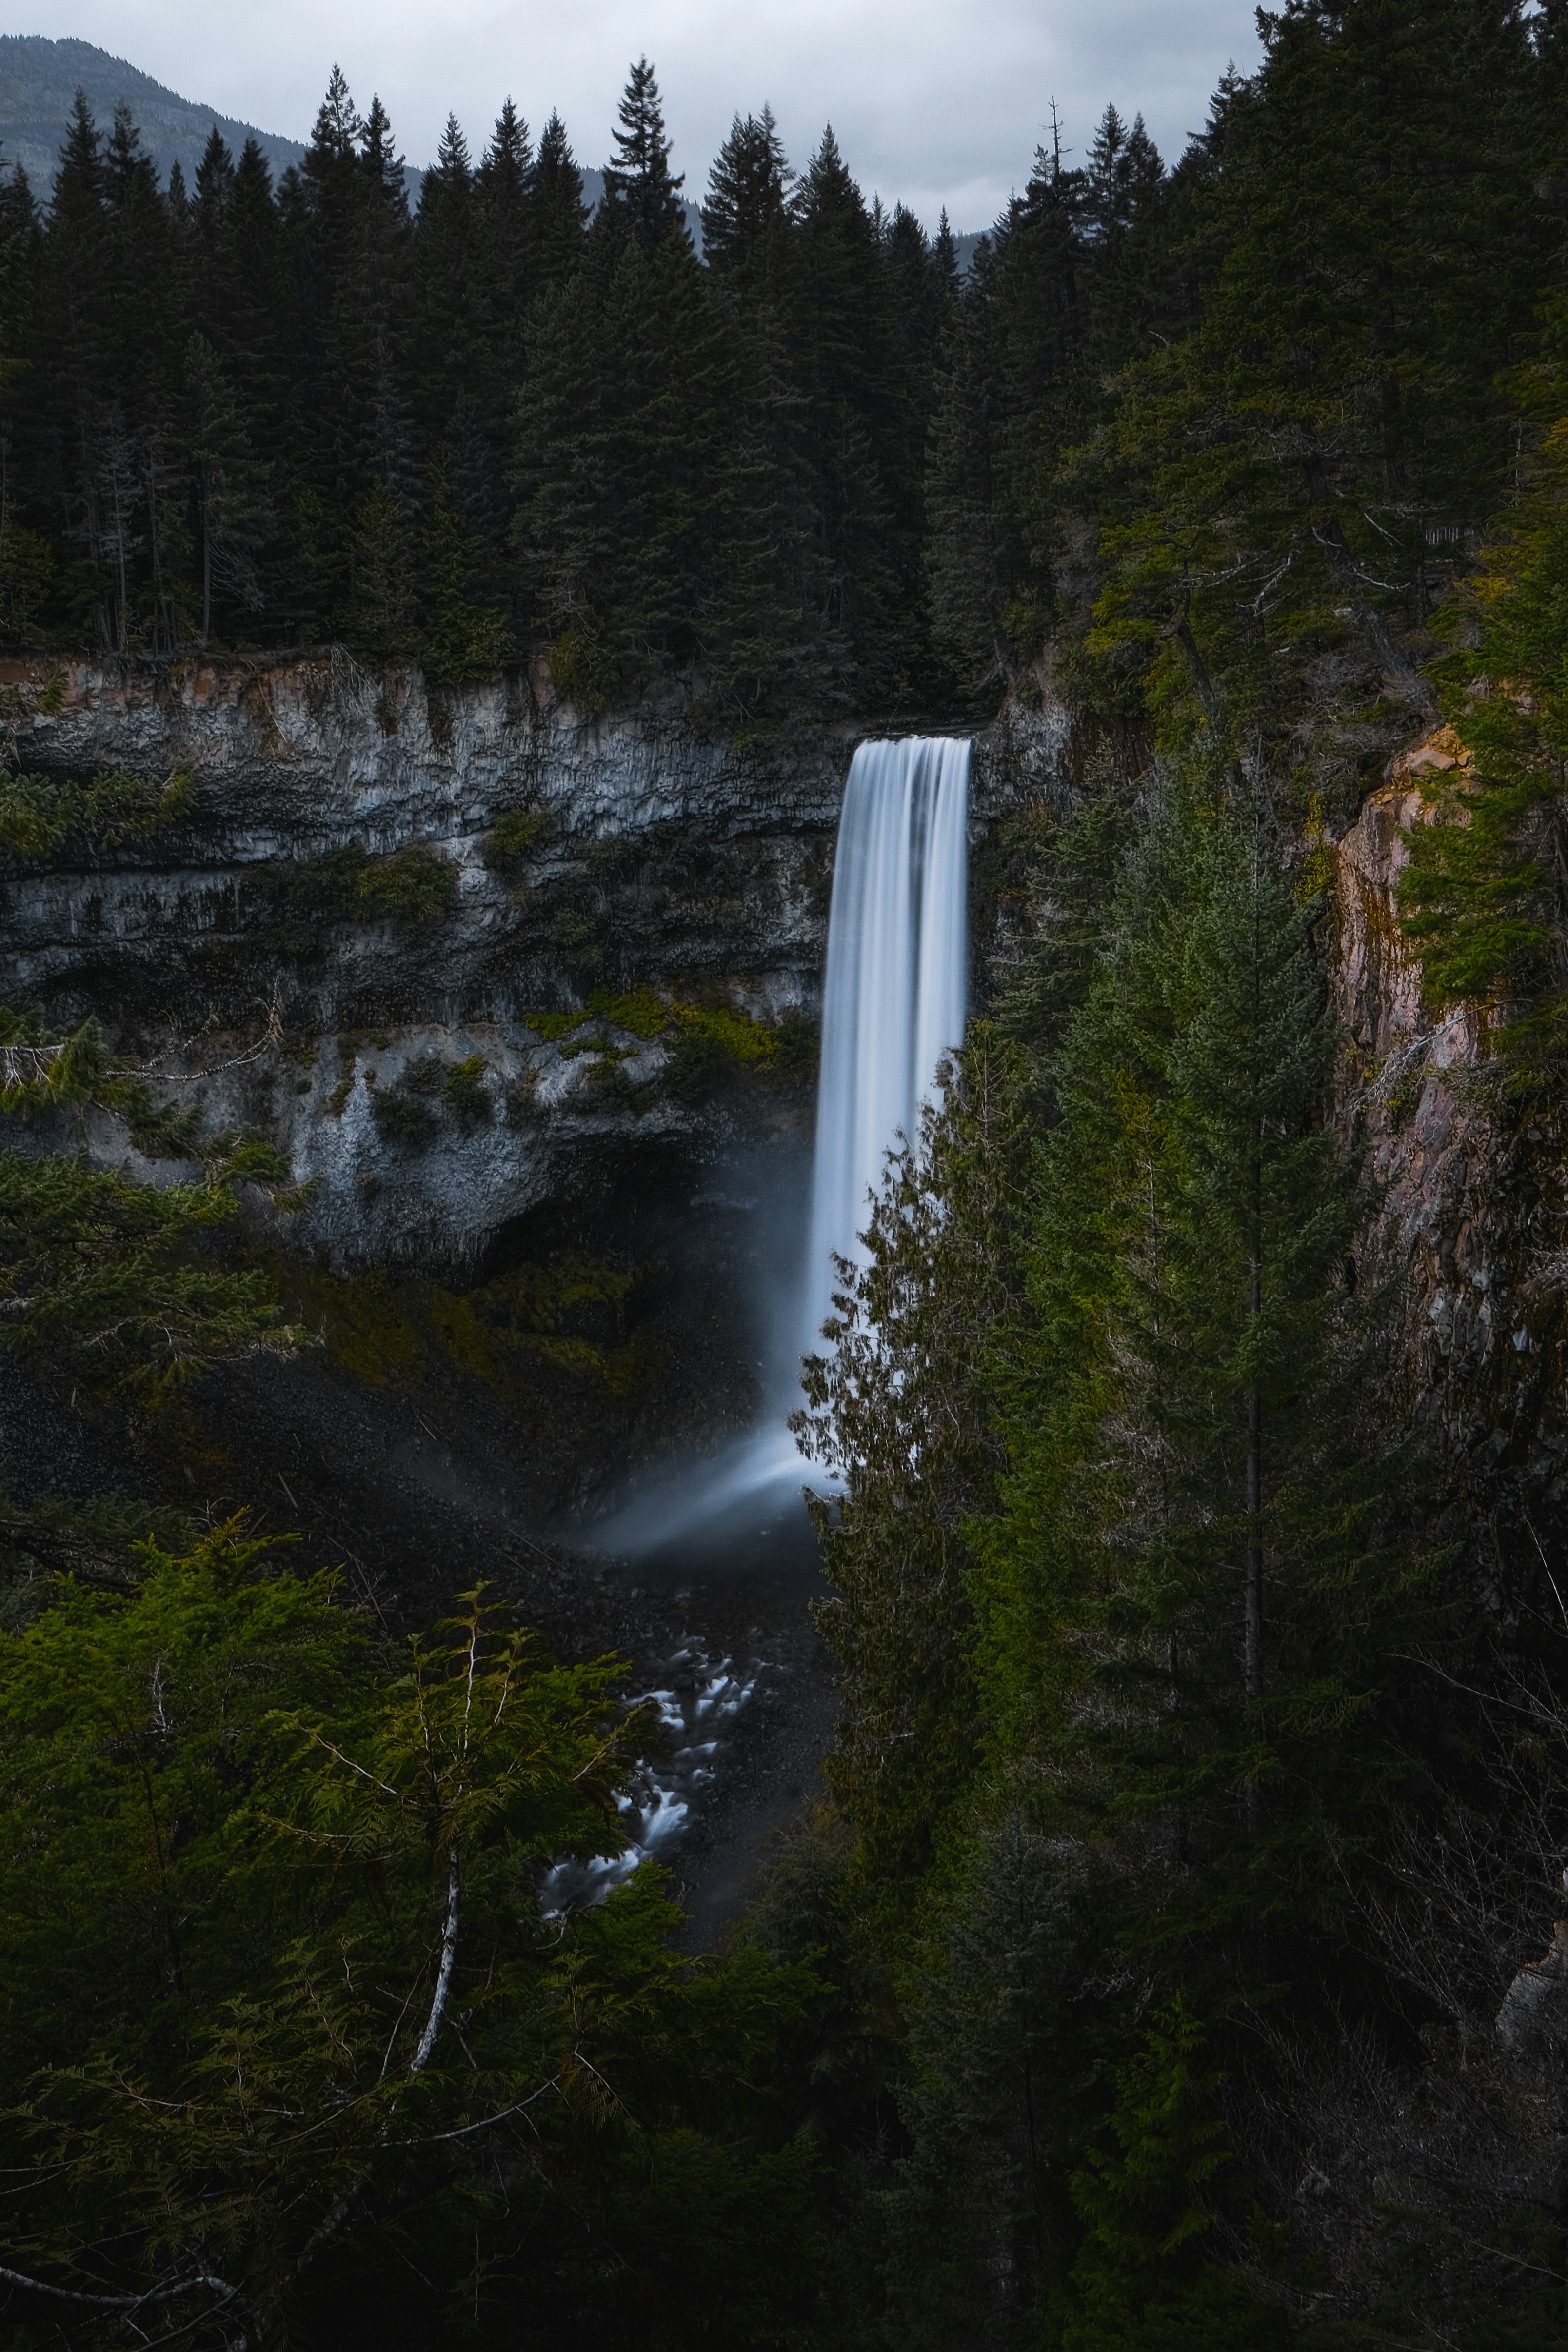 time-lapse photography of waterfalls by trees under gray skies